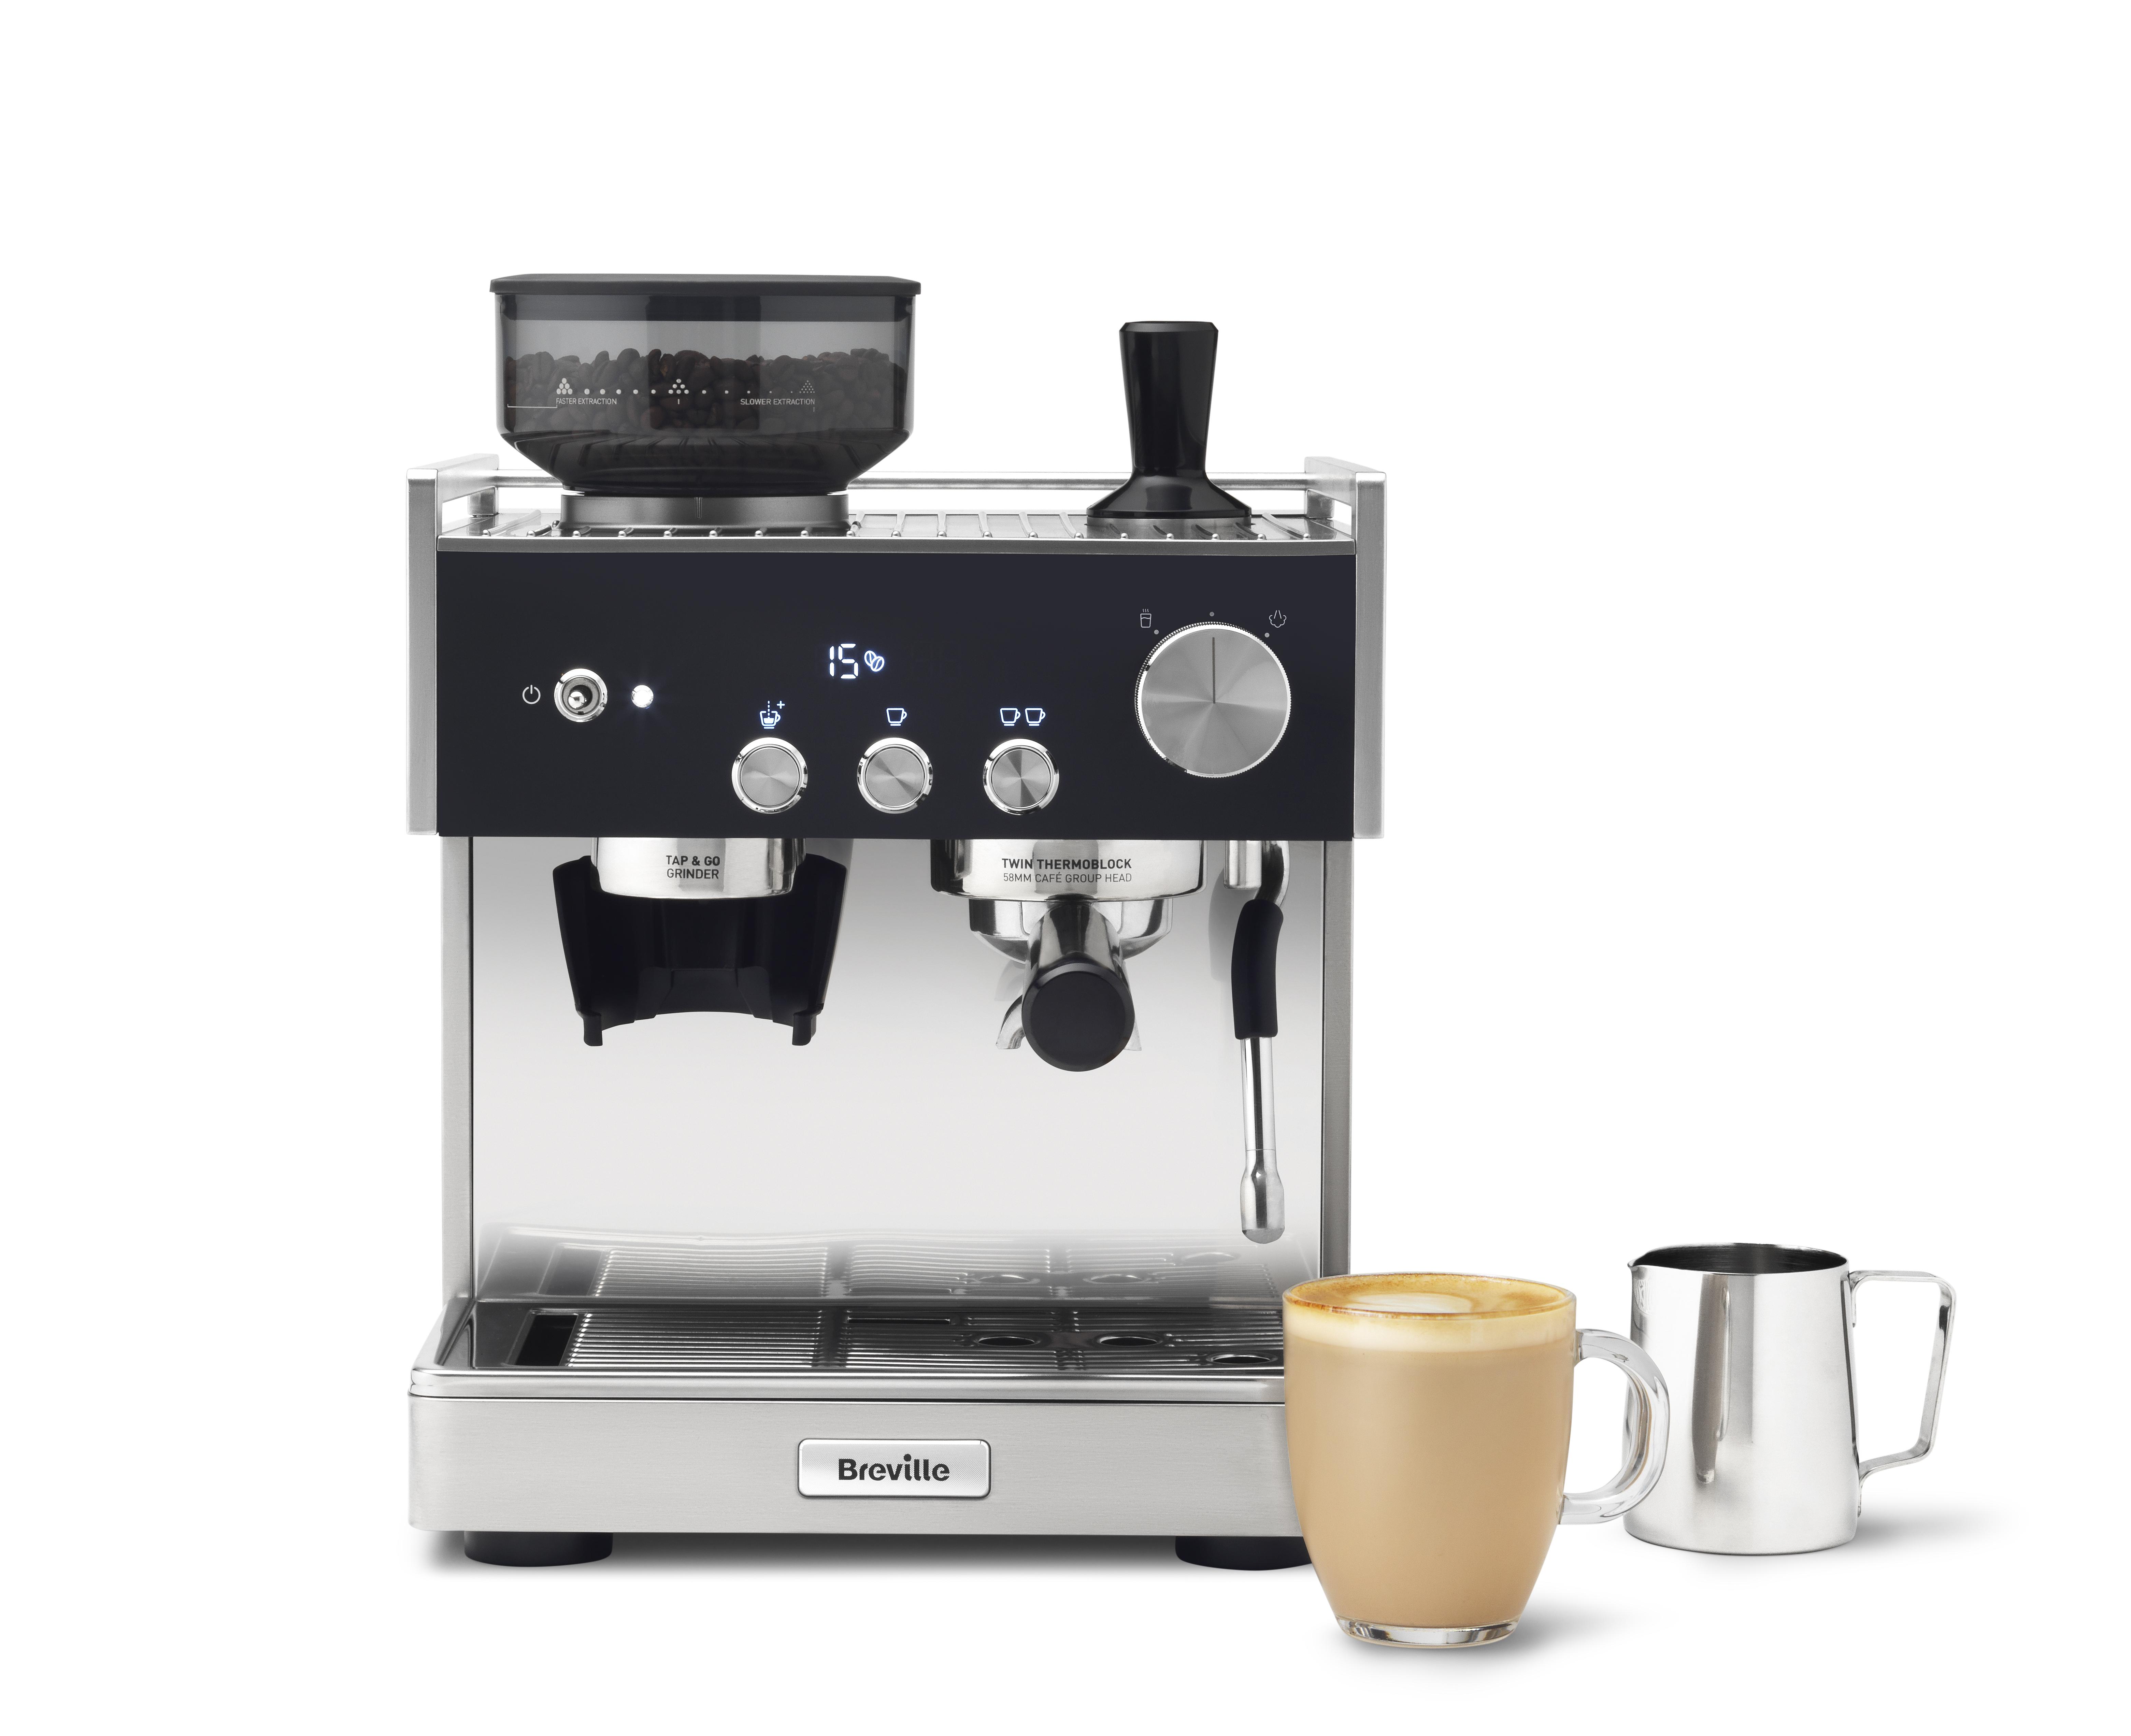 BREVILLE Signature Espresso VCF160 Bean to Cup Coffee Machine - Charcoal, Stainless Steel